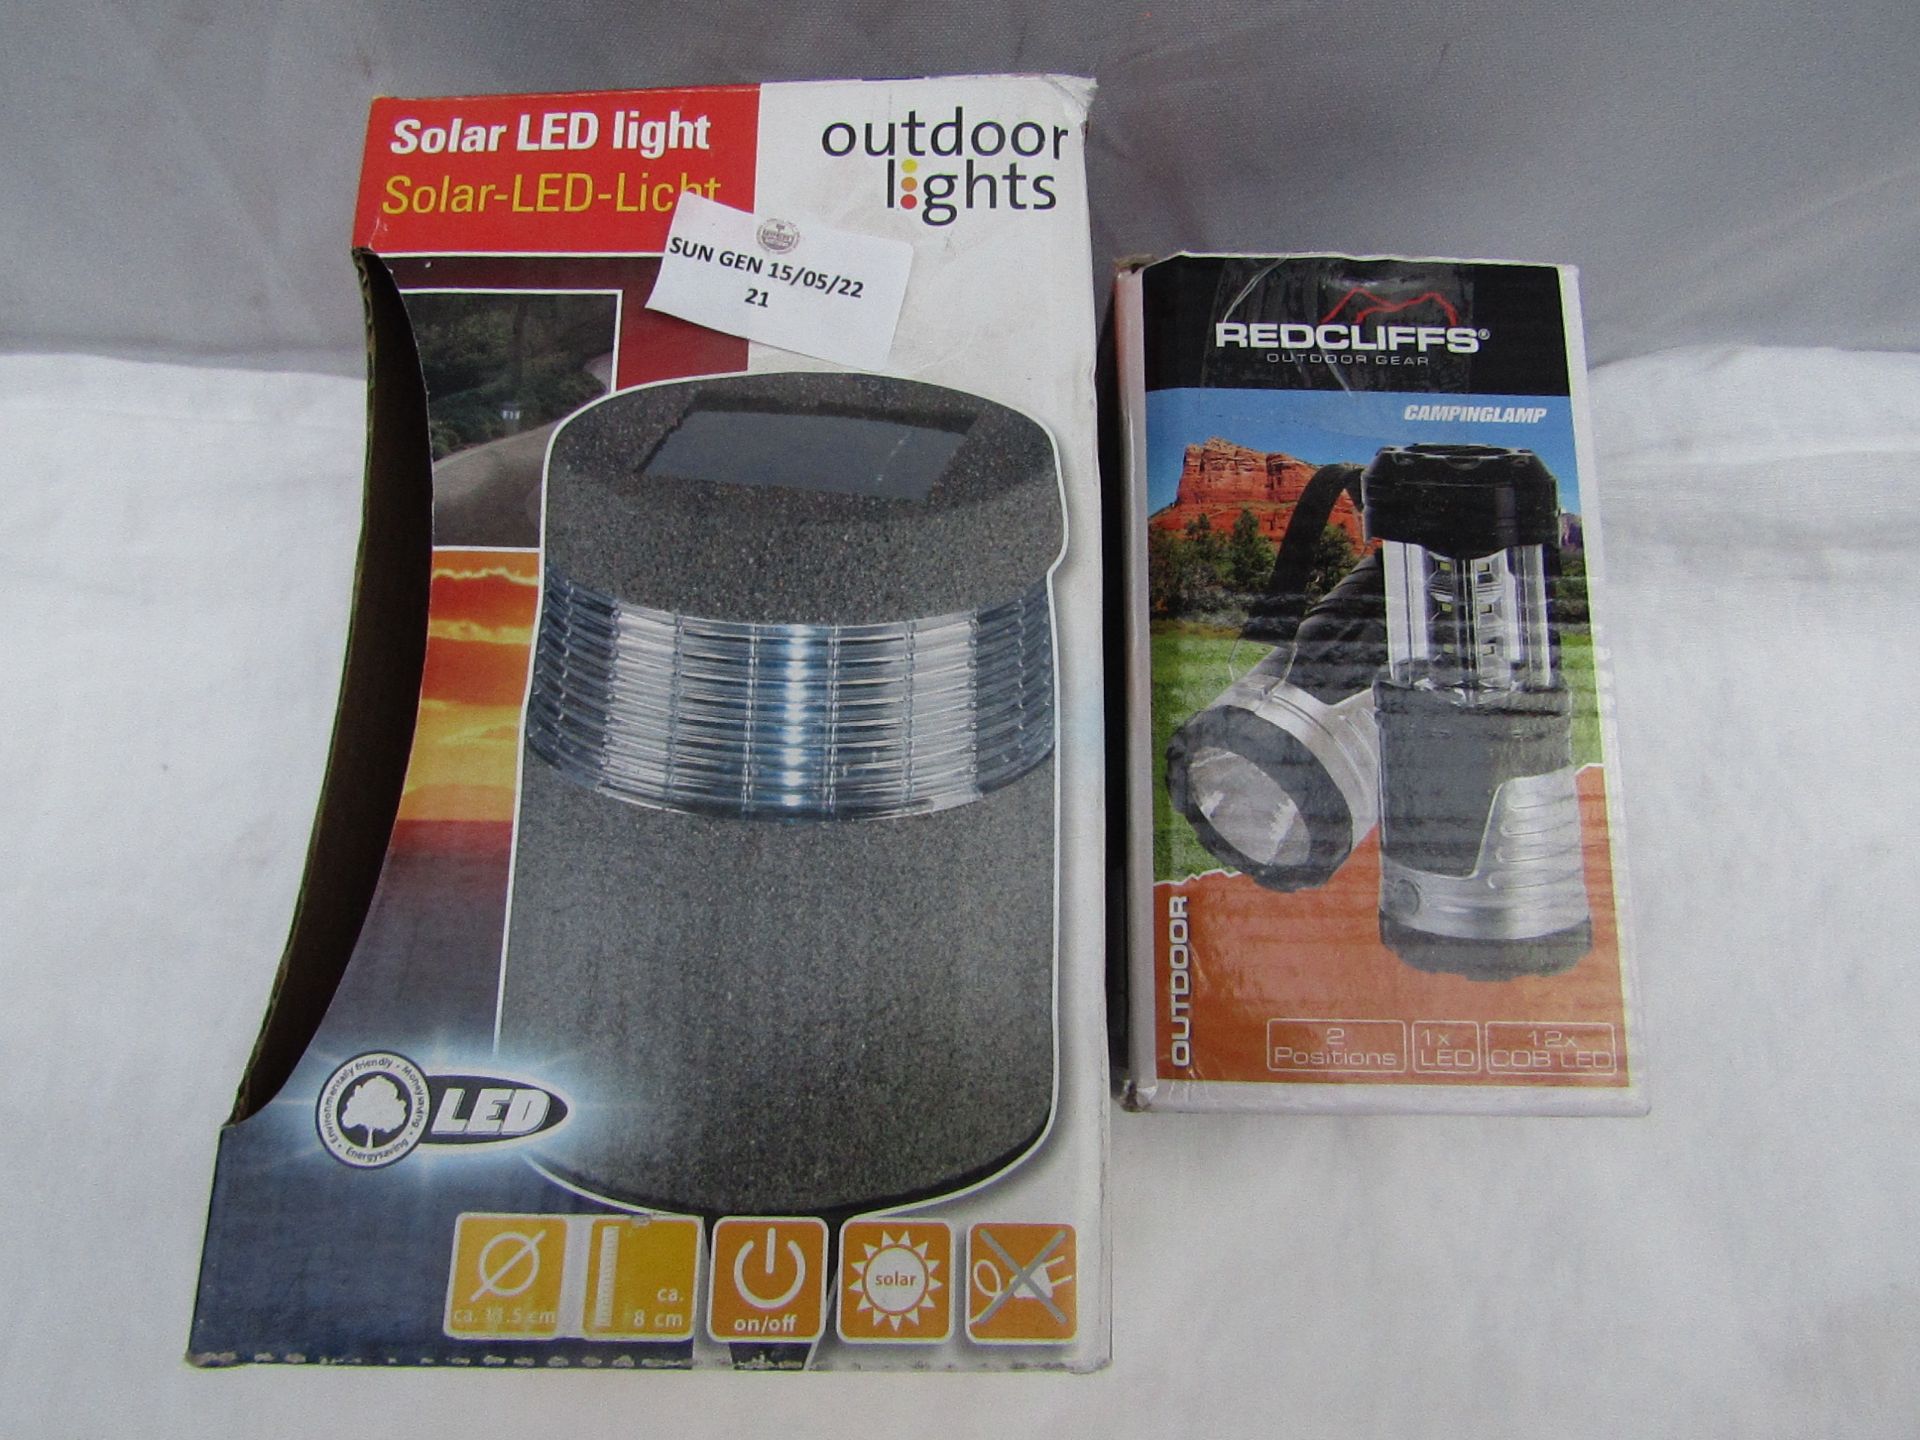 1x Redcliffs - LED Camping Lamp - Unchecked & Boxed. 1x Outdoor Lights - Solar LED Light - Unchecked